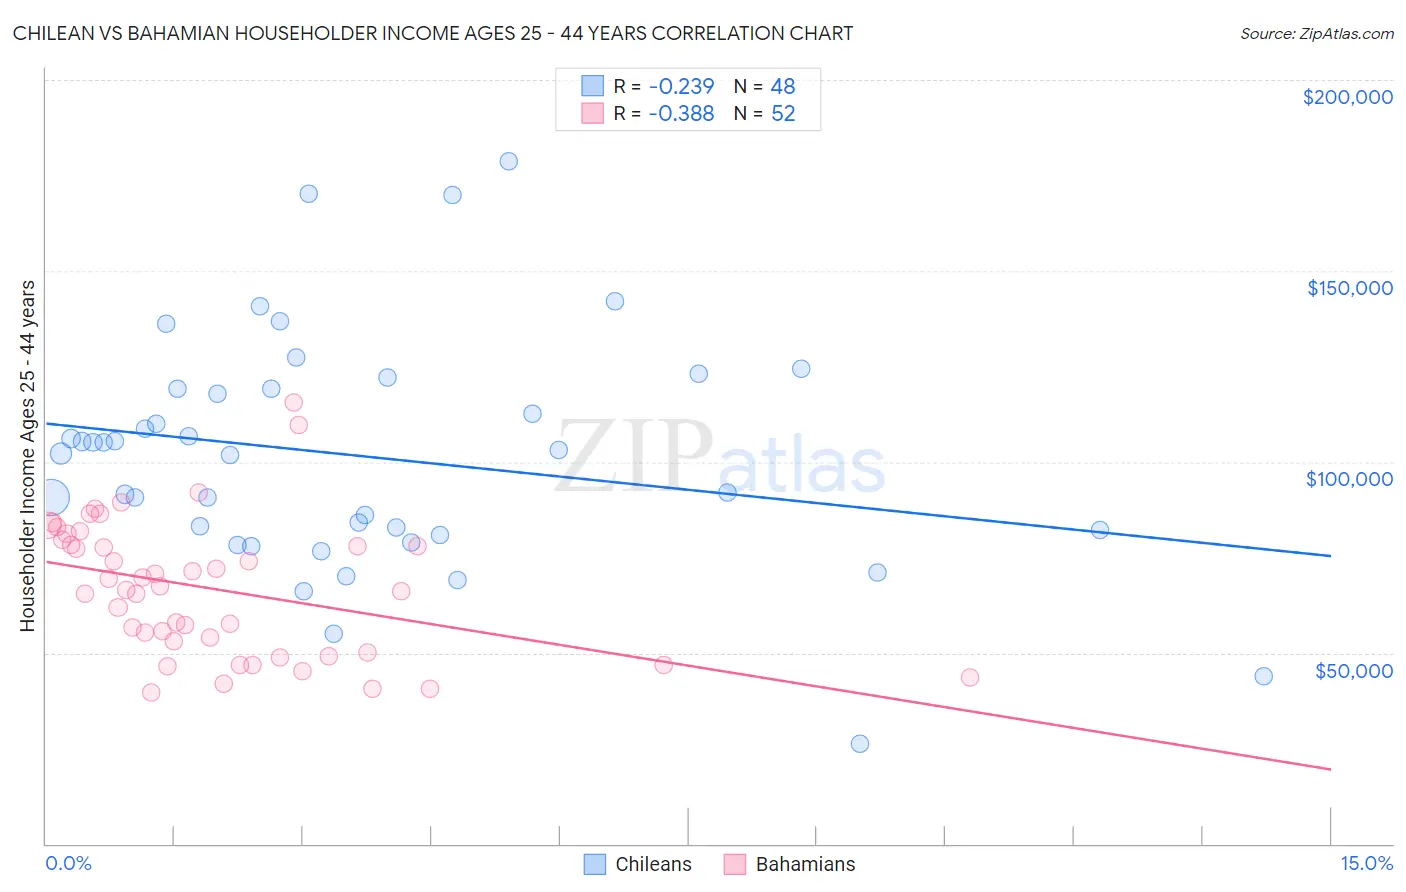 Chilean vs Bahamian Householder Income Ages 25 - 44 years